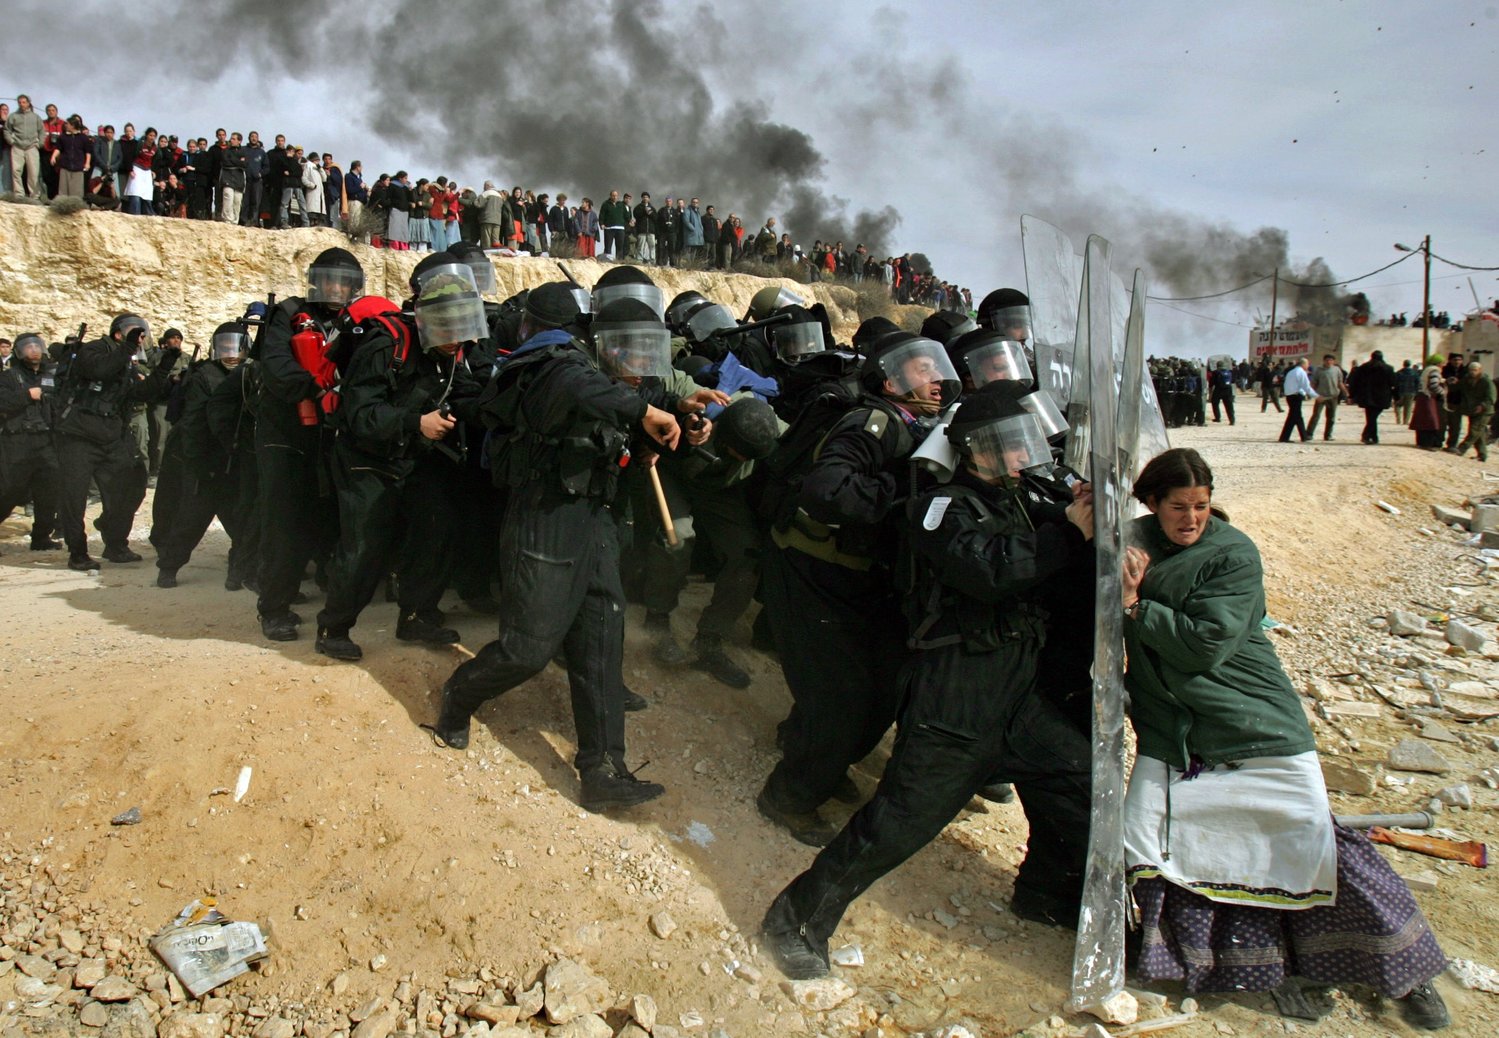 This Pulitzer Prize-winning photo of a Jewish settler challenging Israeli security officers in the West Bank settlement of Amona, Feb. 1, 2006, will be among the first NFTs available on AP’s NFT marketplace. (AP Photo/Oded Balilty)